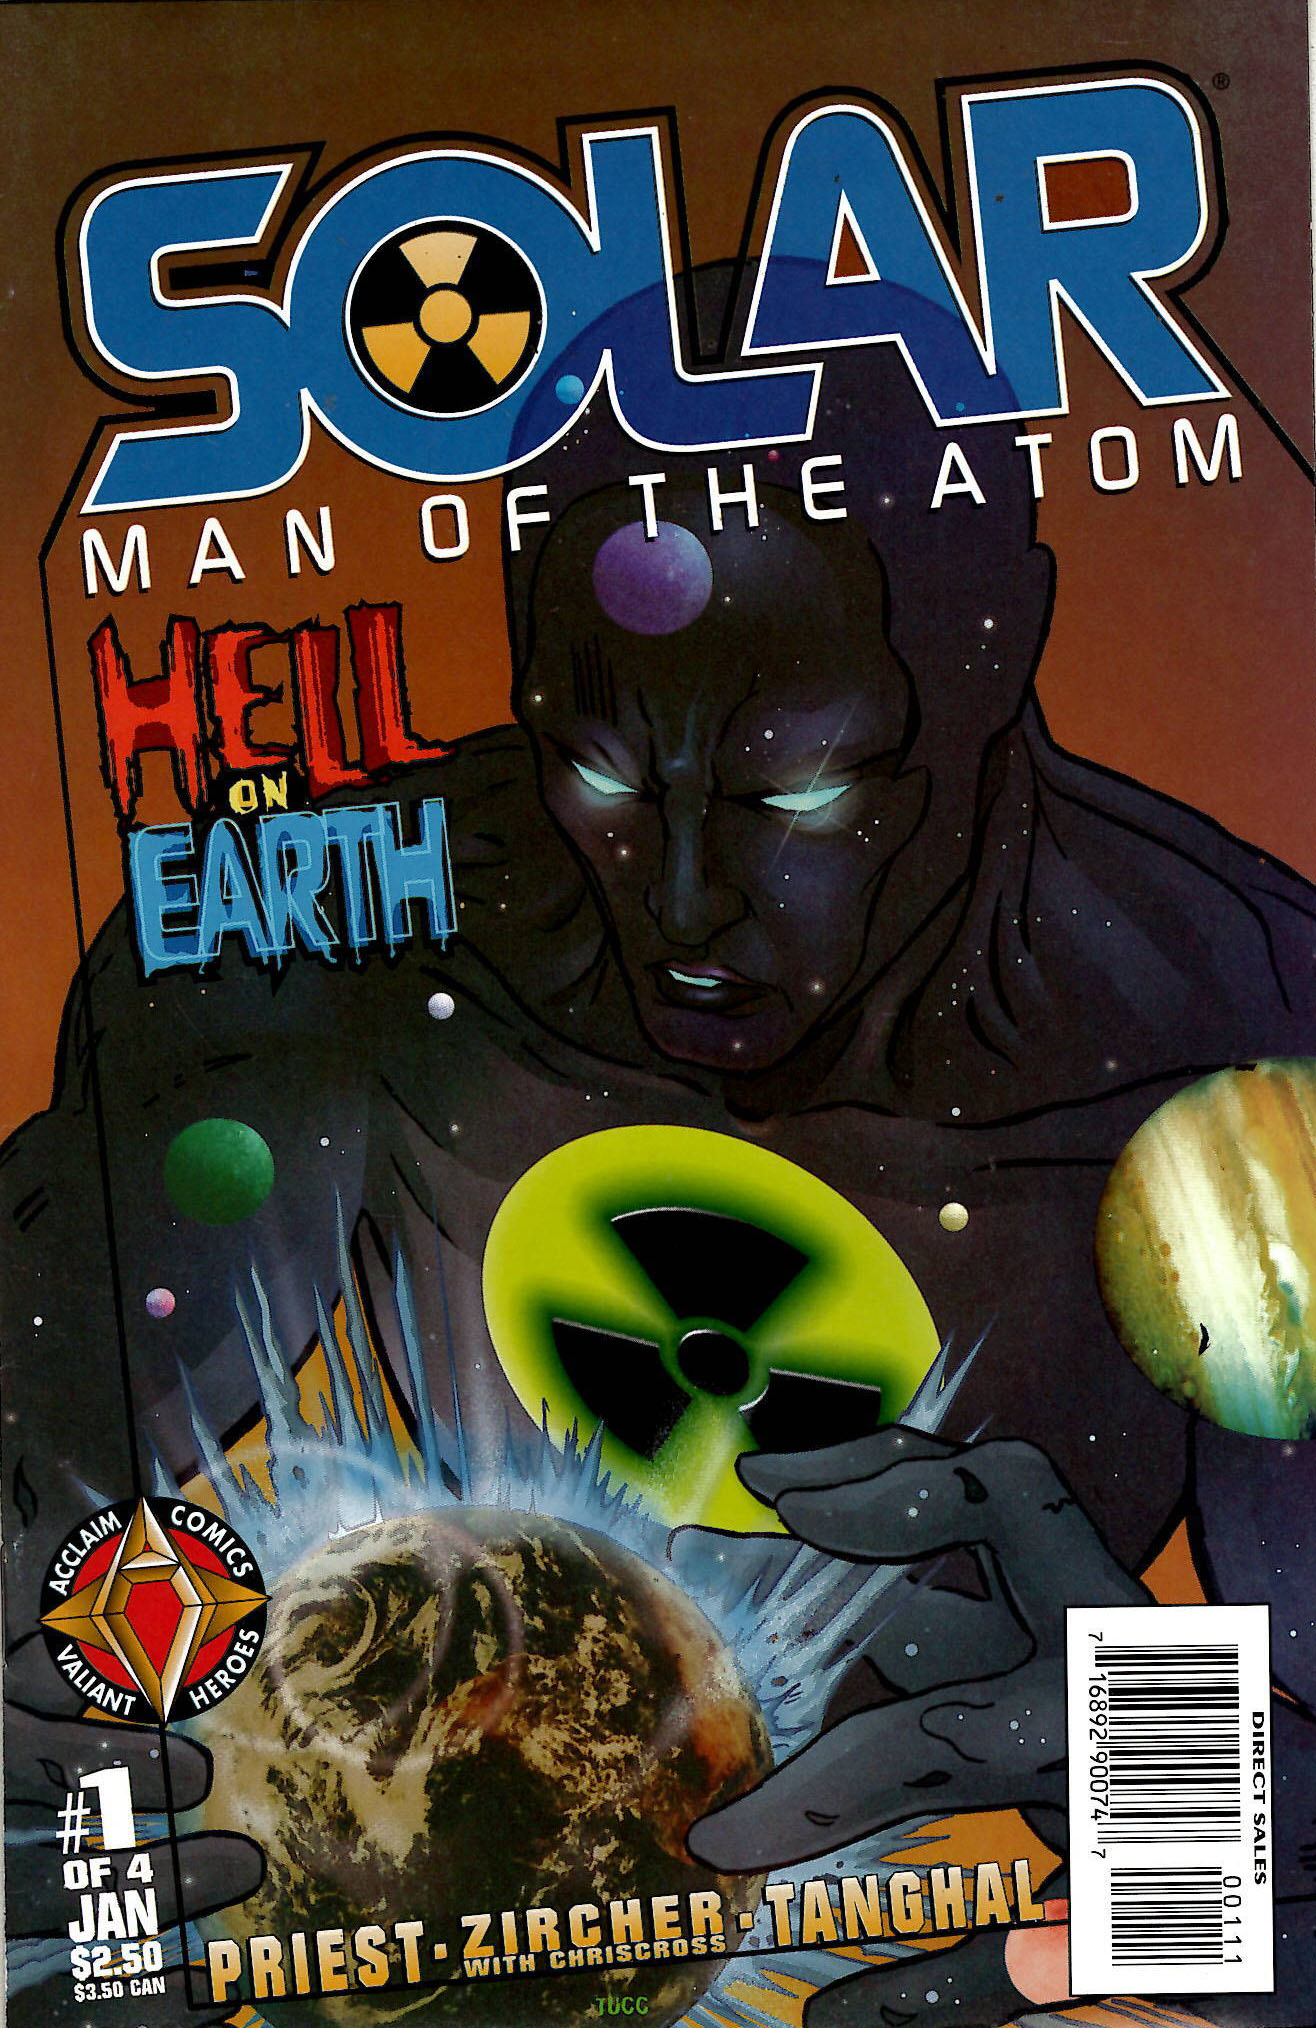 Solar Man of the Atom Hell on Earth (1998) Complete Bundle - Used